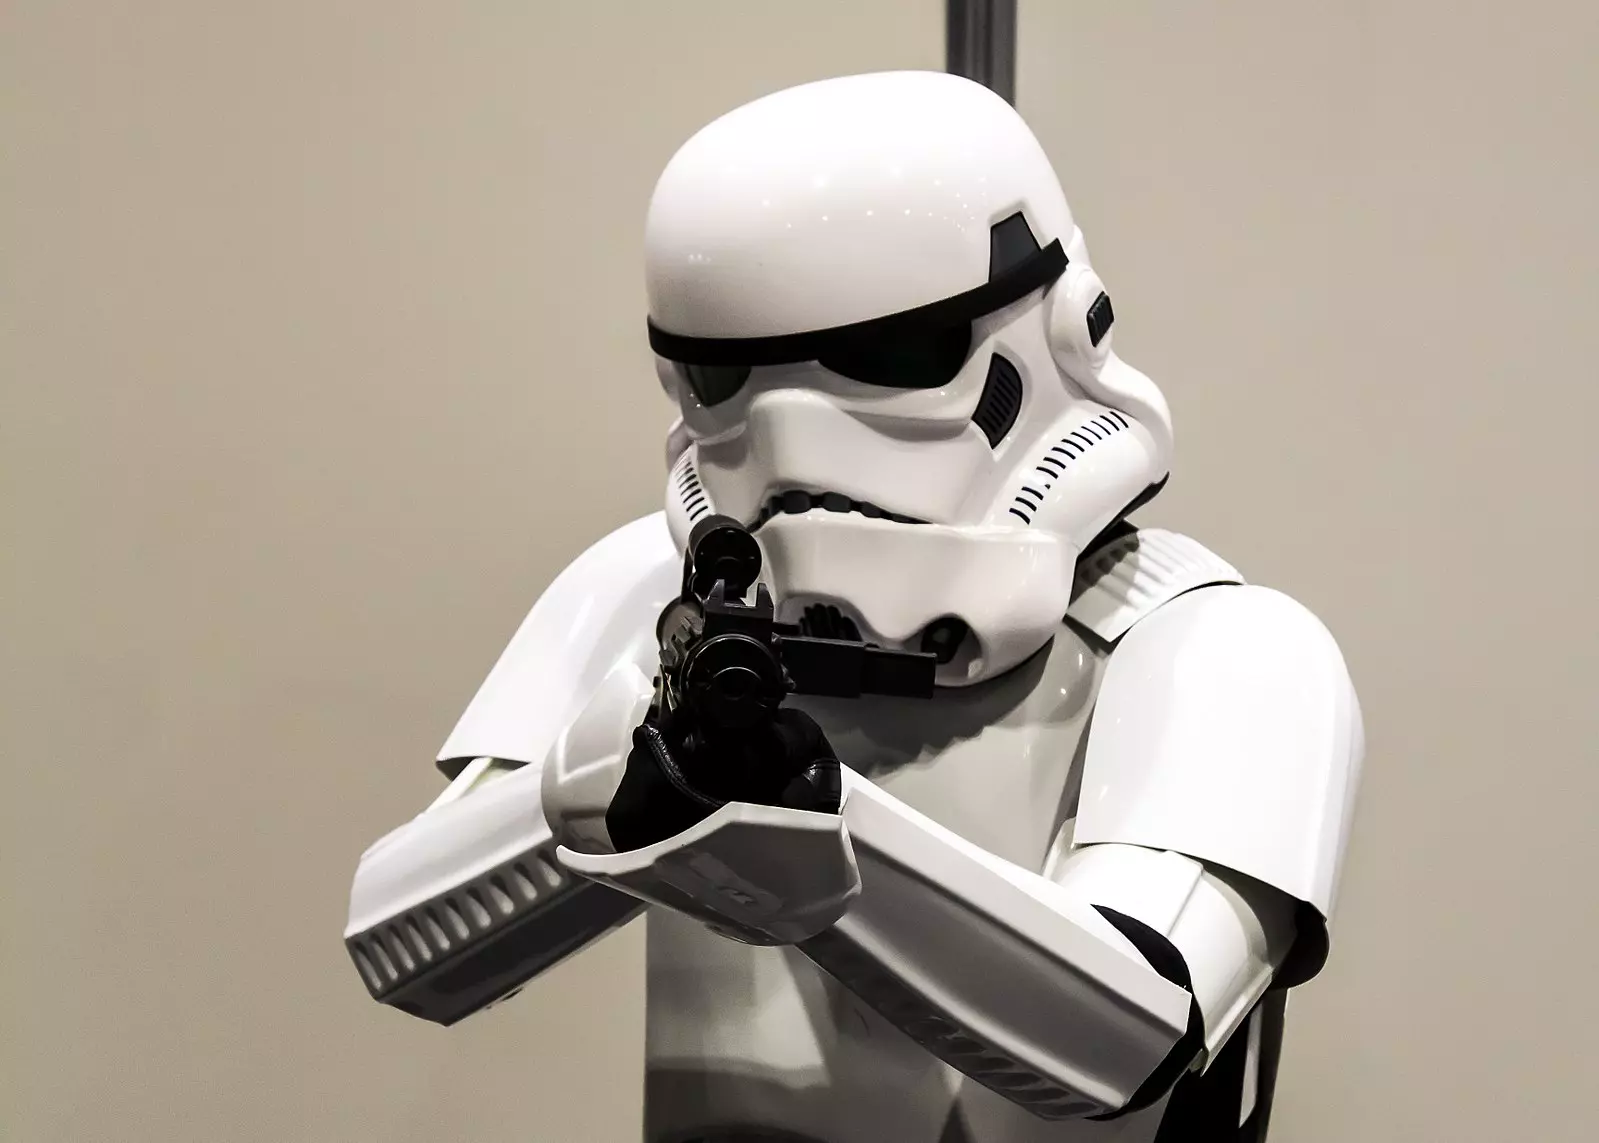 An attendee dressed up as a Stormtrooper at London Comic Con, 2015. (Photo by big-ashb/Wikimedia Commons)